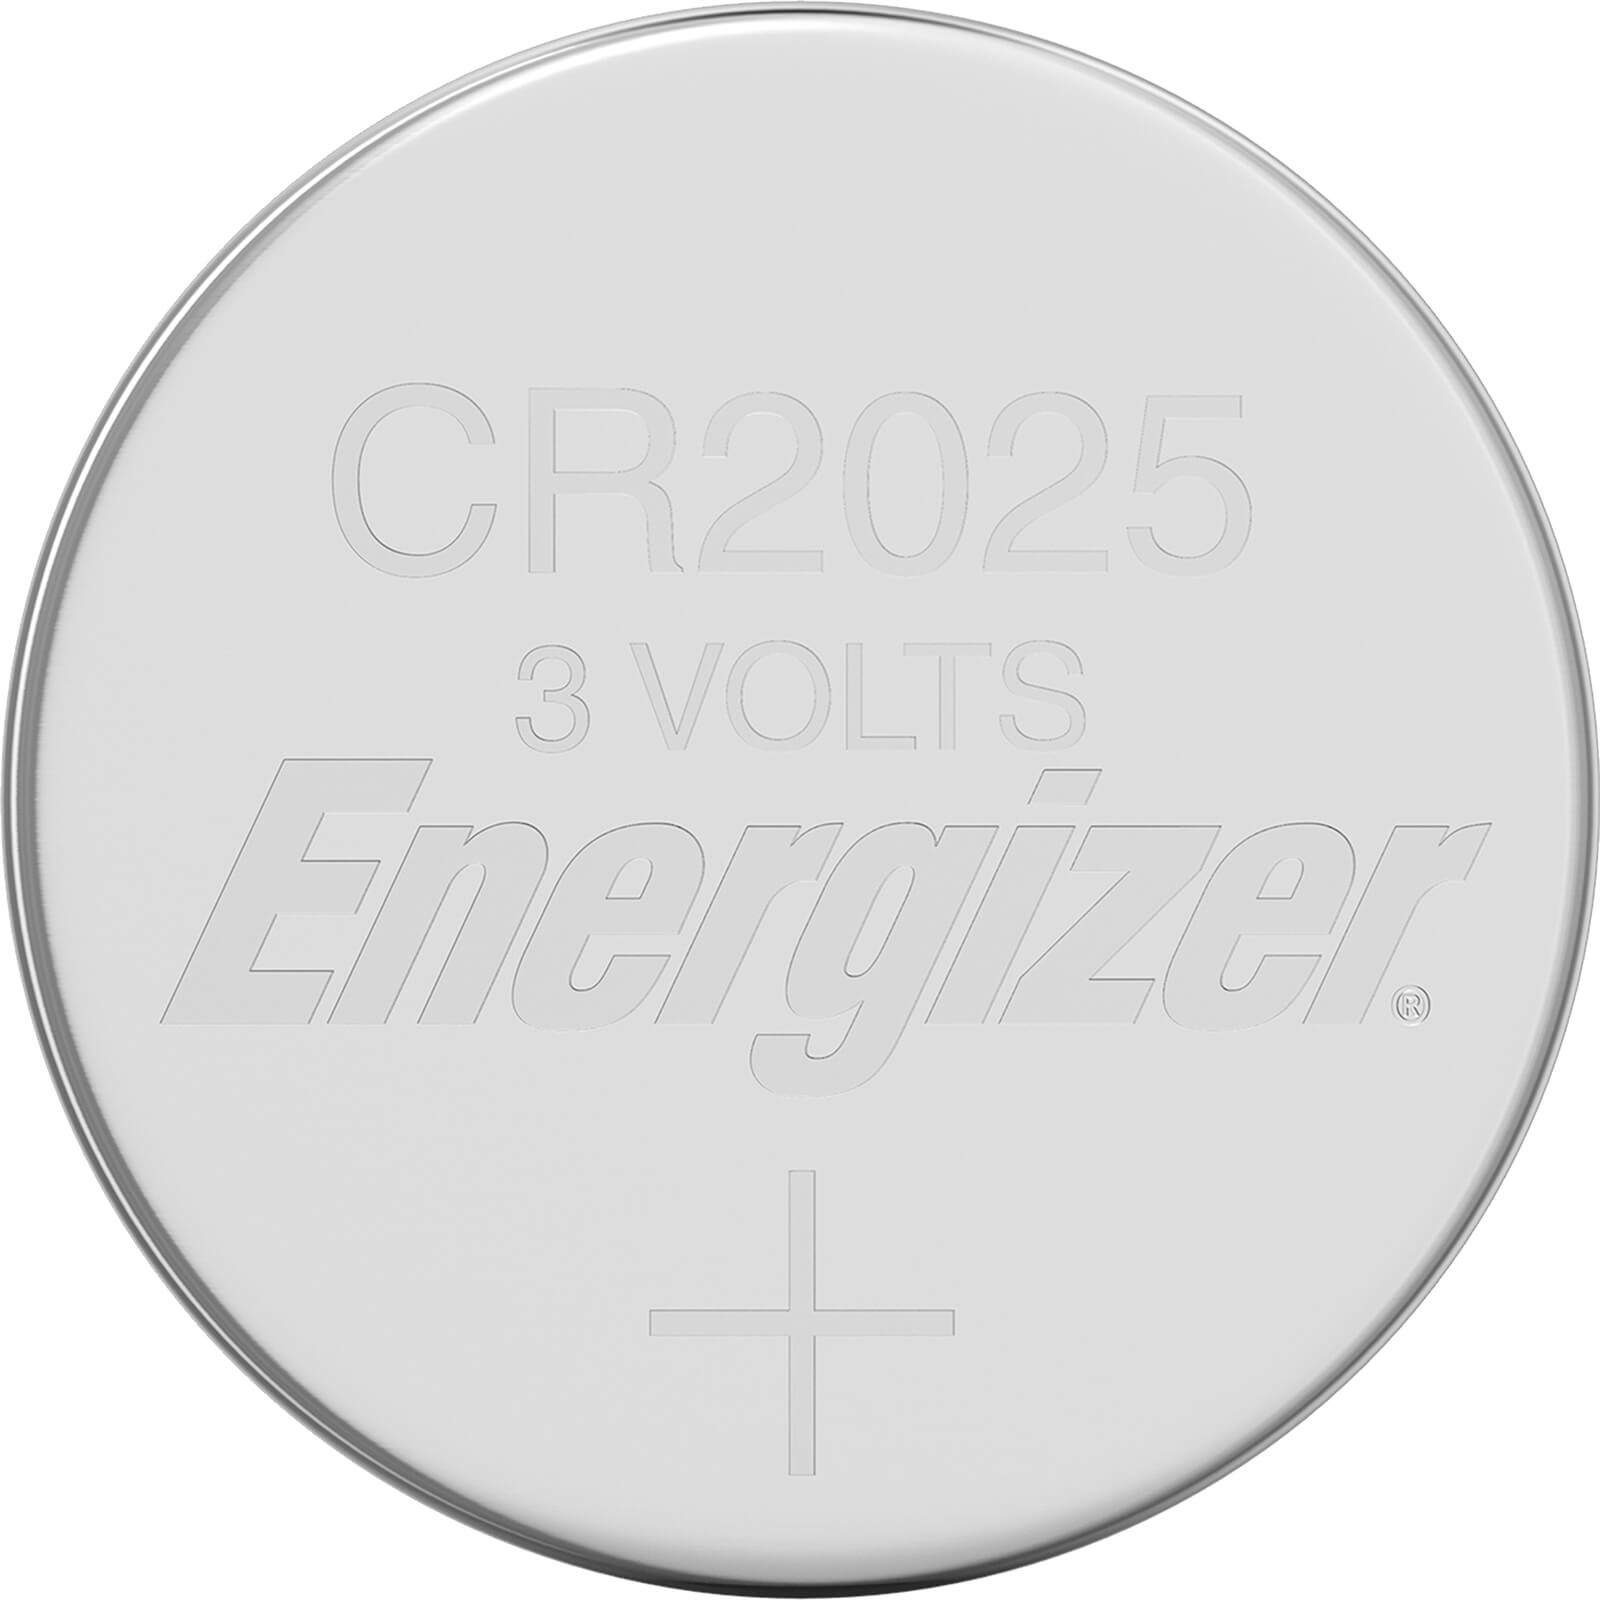 Energizer 2025 Lithium Coin Battery - 4 Pack